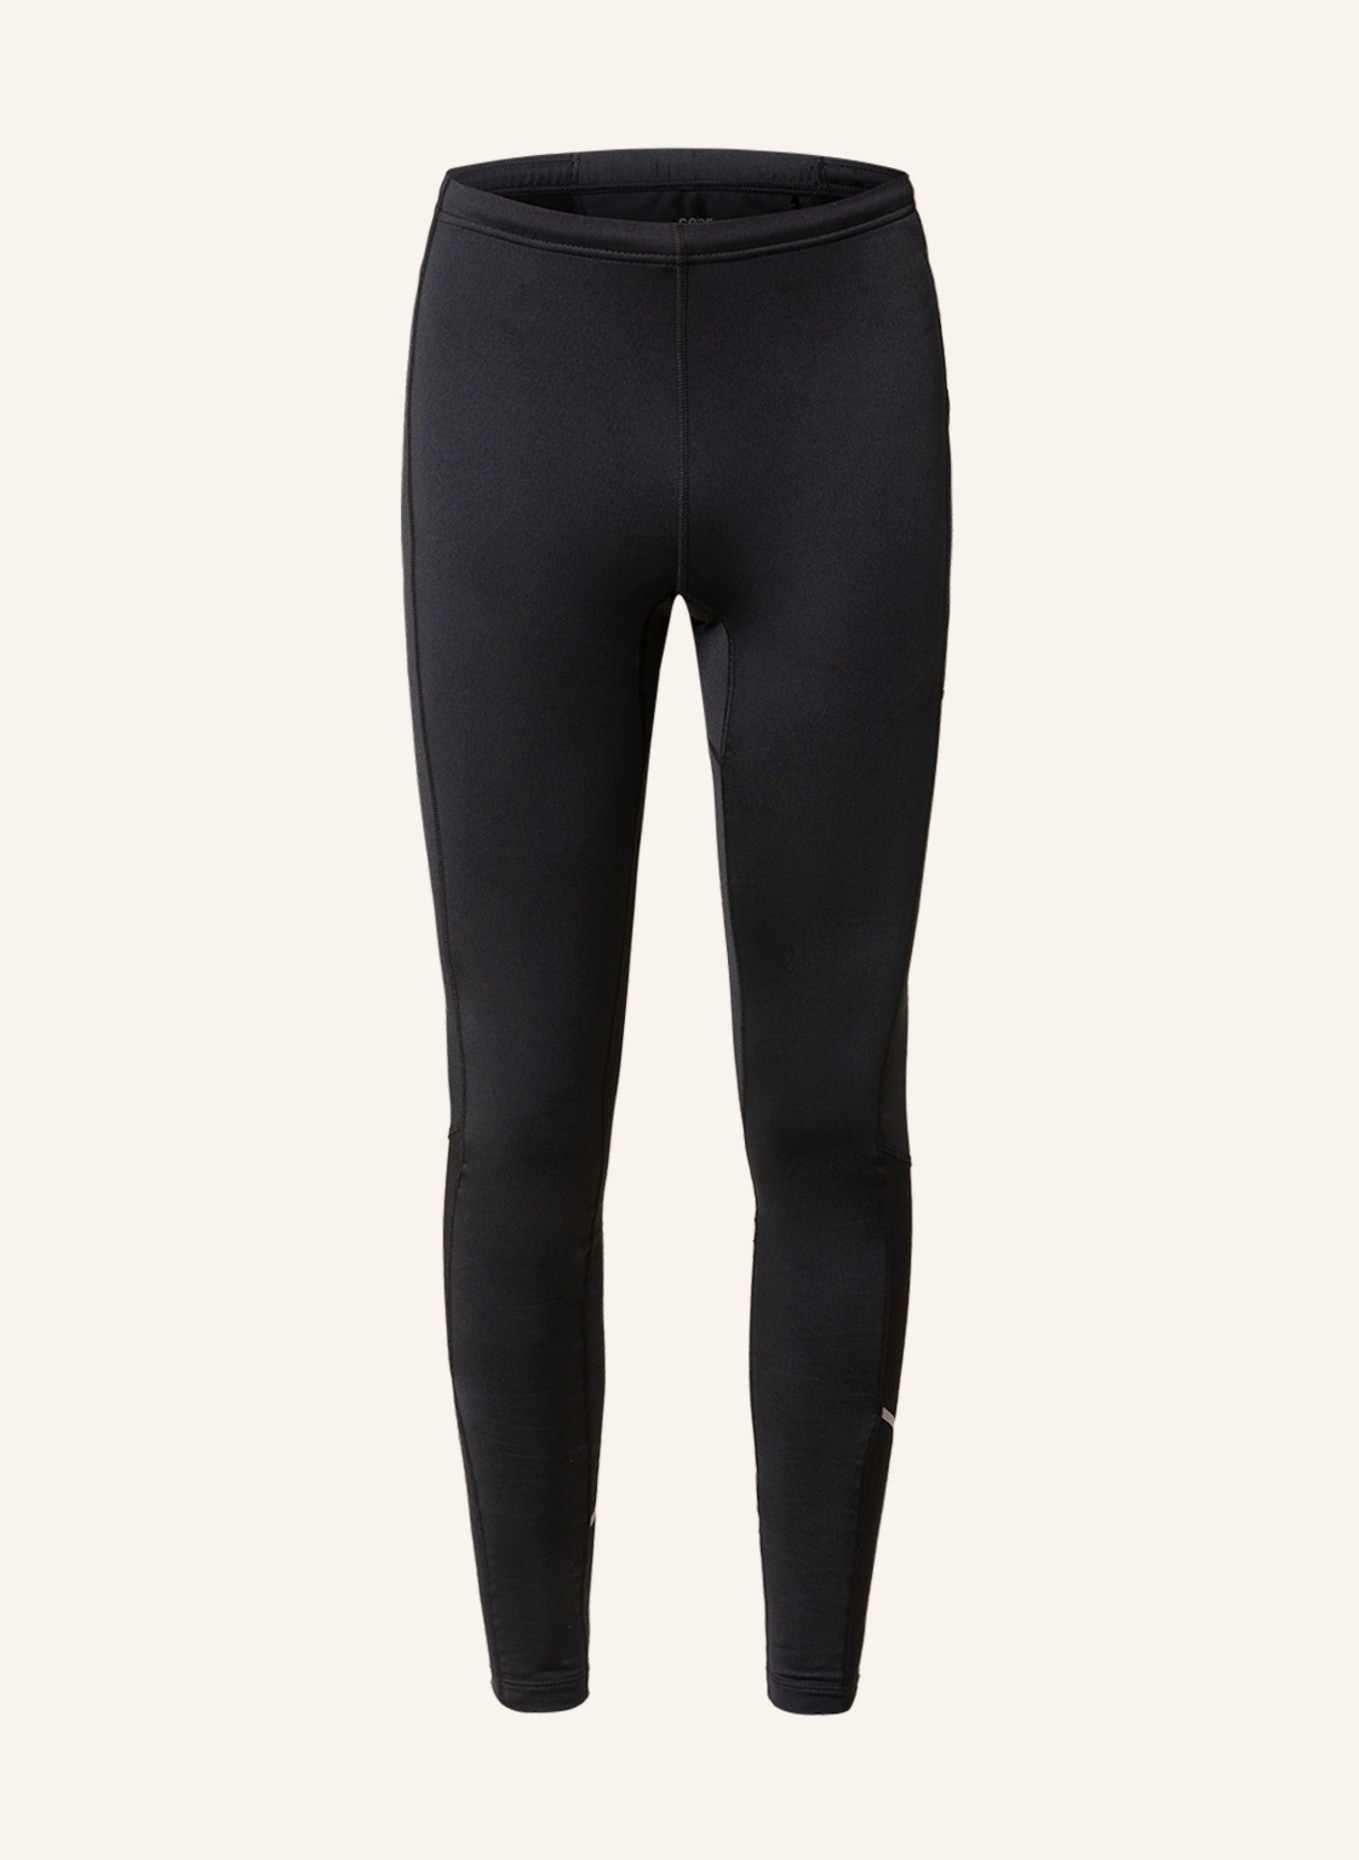 GORE RUNNING WEAR Tights R3 THERMO in black